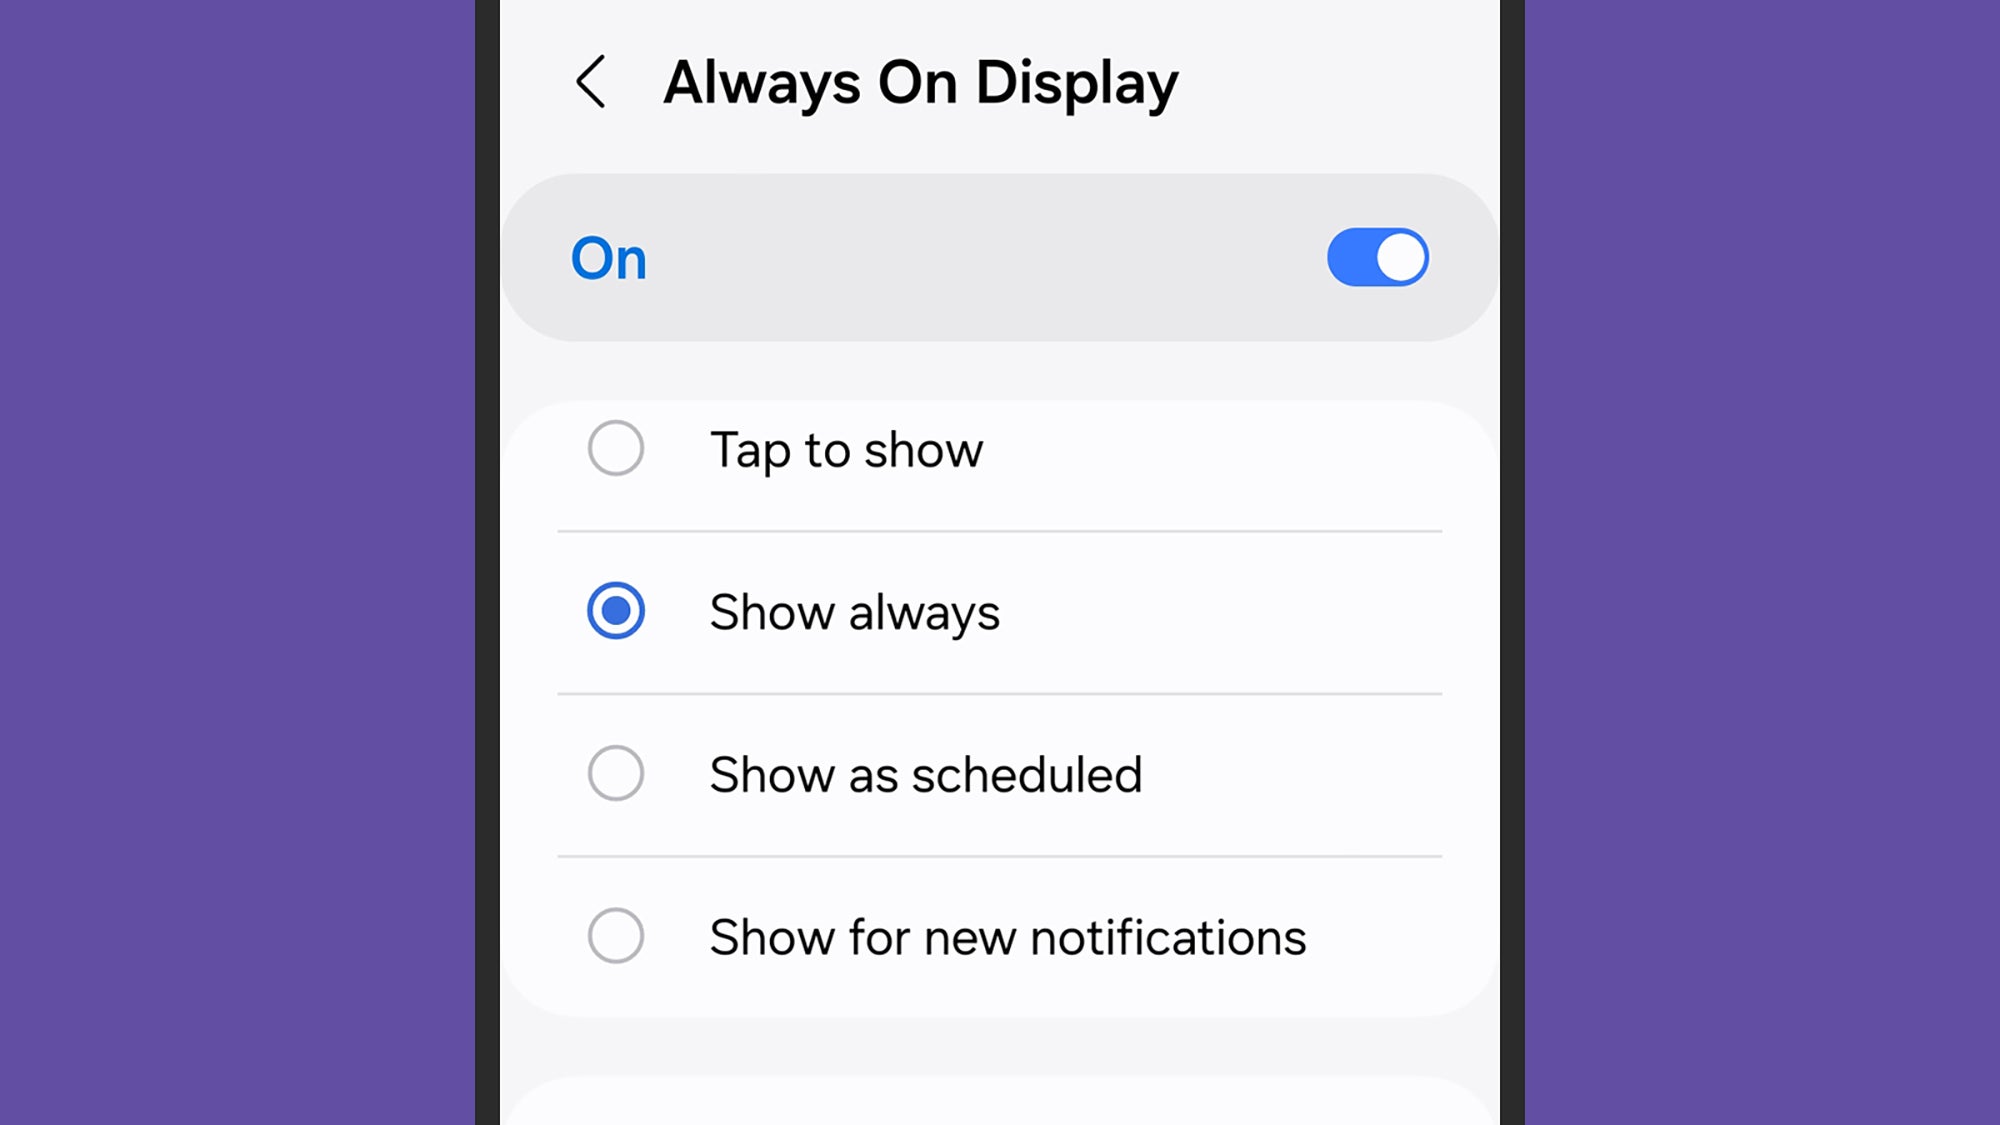 On Galaxy phones, the always on display can be set on a schedule.